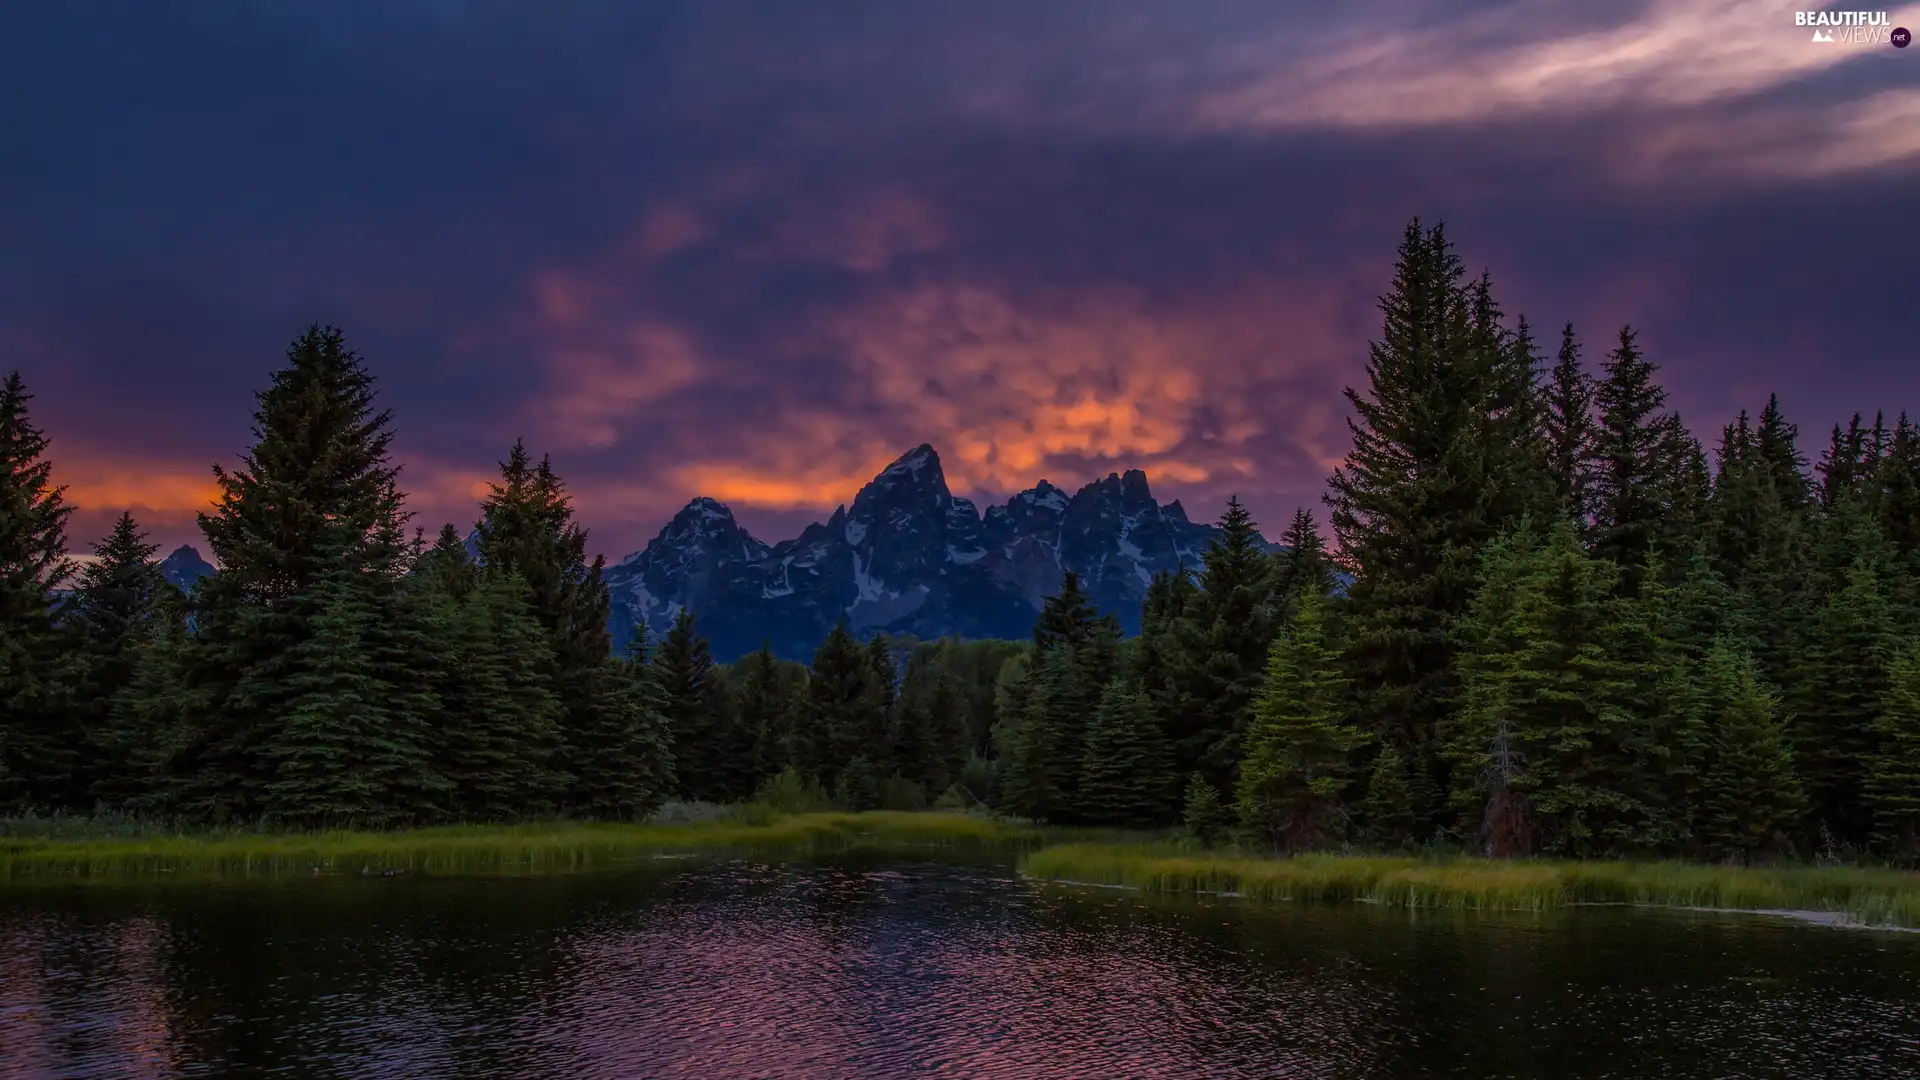 Teton Range Mountains, trees, The United States, viewes, State of Wyoming, Snake River, Grand Teton National Park, Great Sunsets